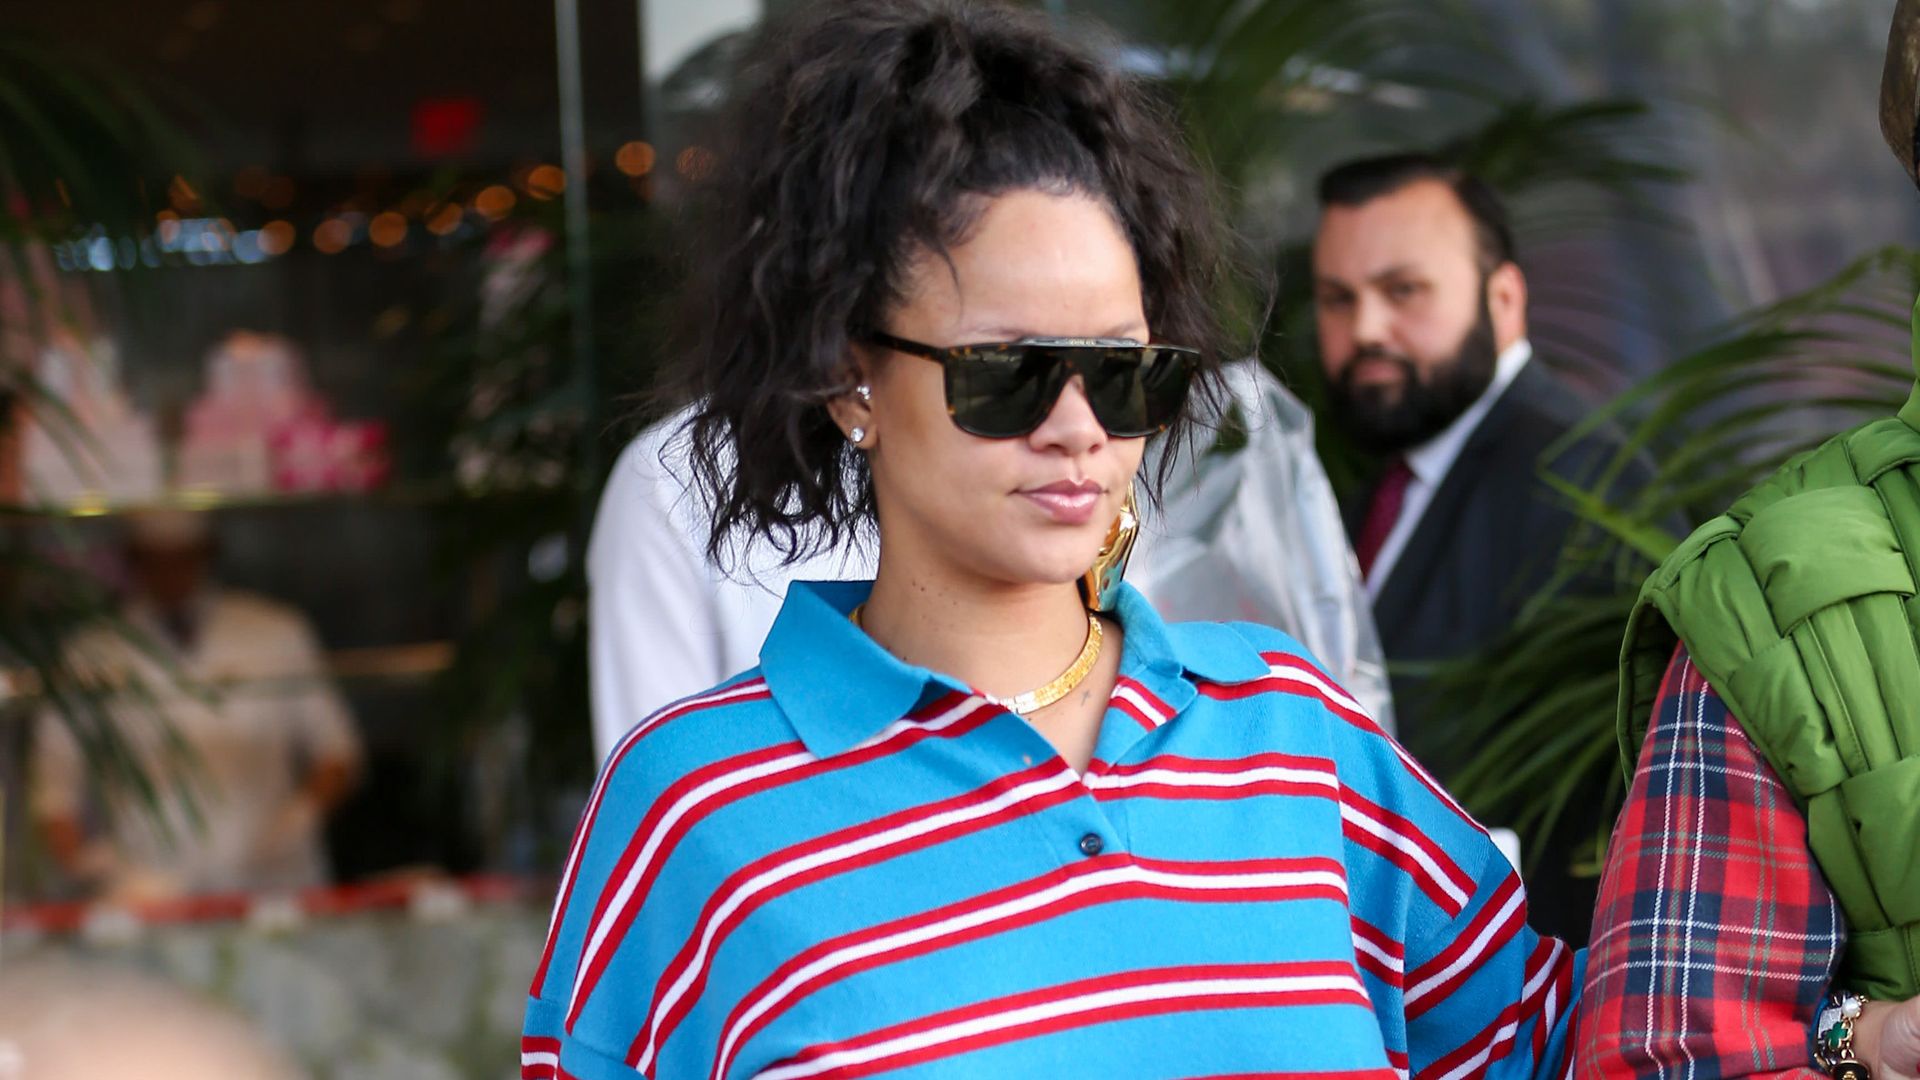  Rihanna out and about in LA